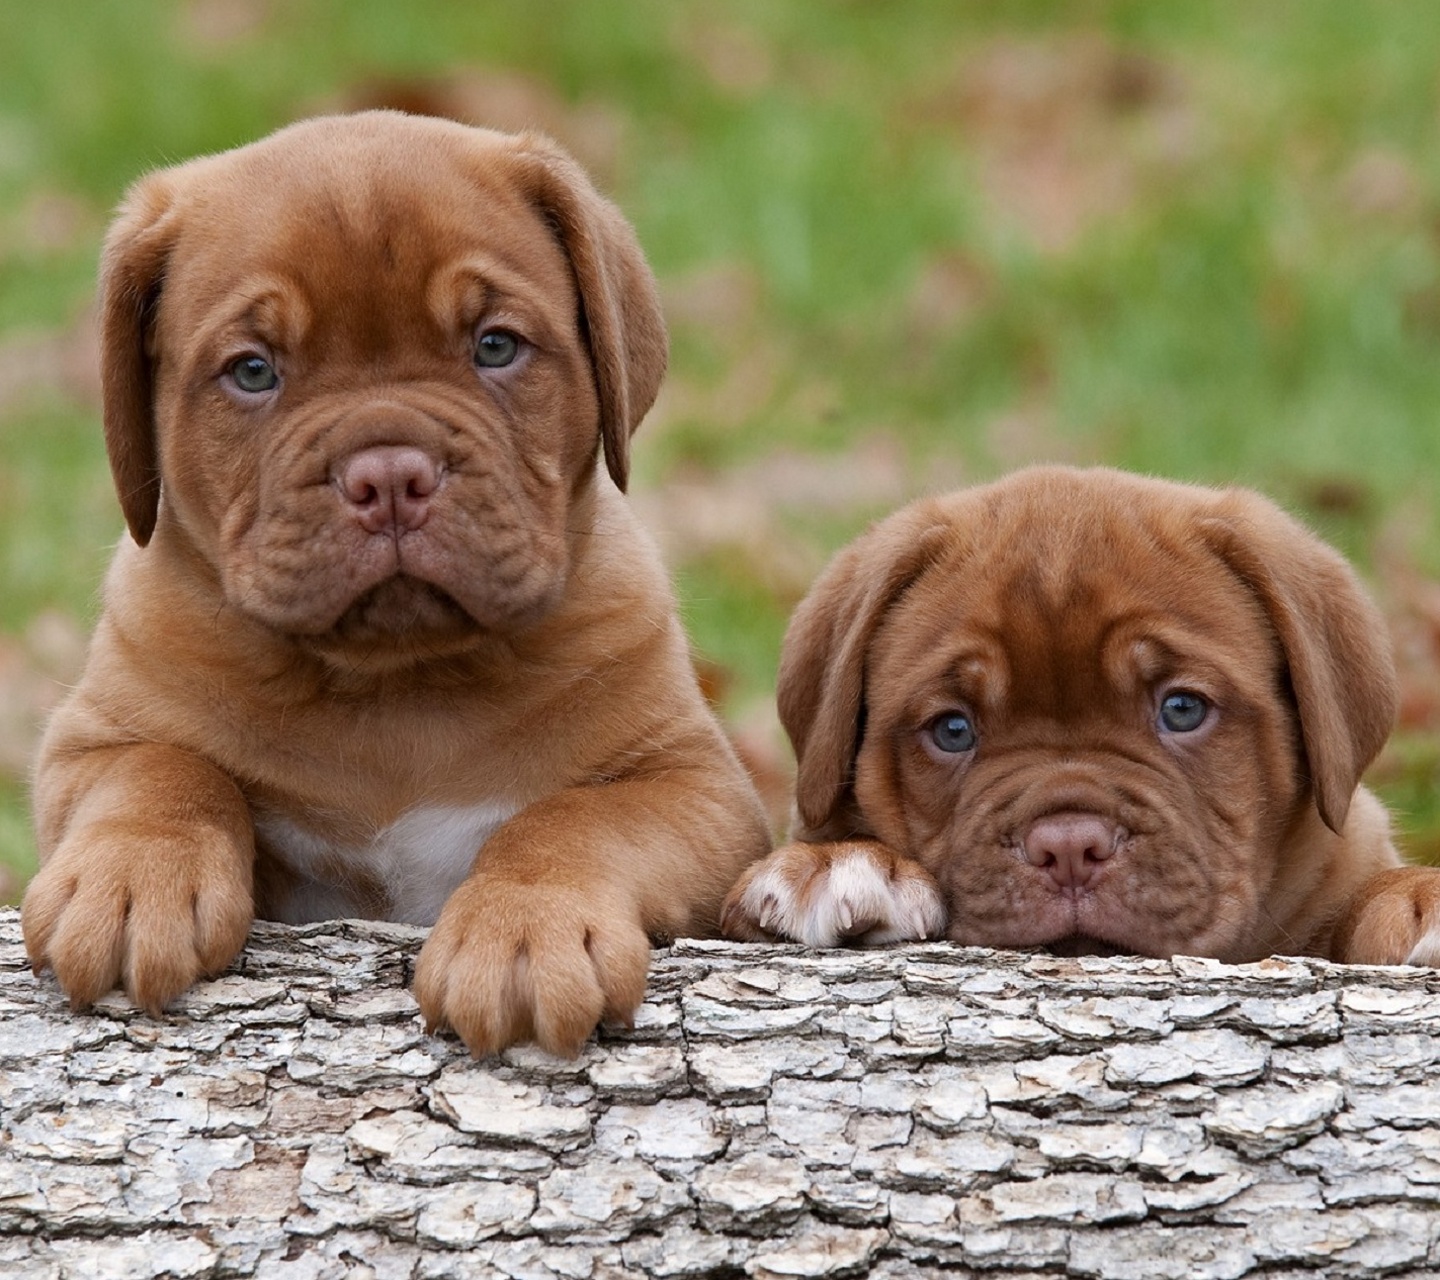 Free Cute Puppies Wallpaper Background for Mobiles - Mobile Wallpapers